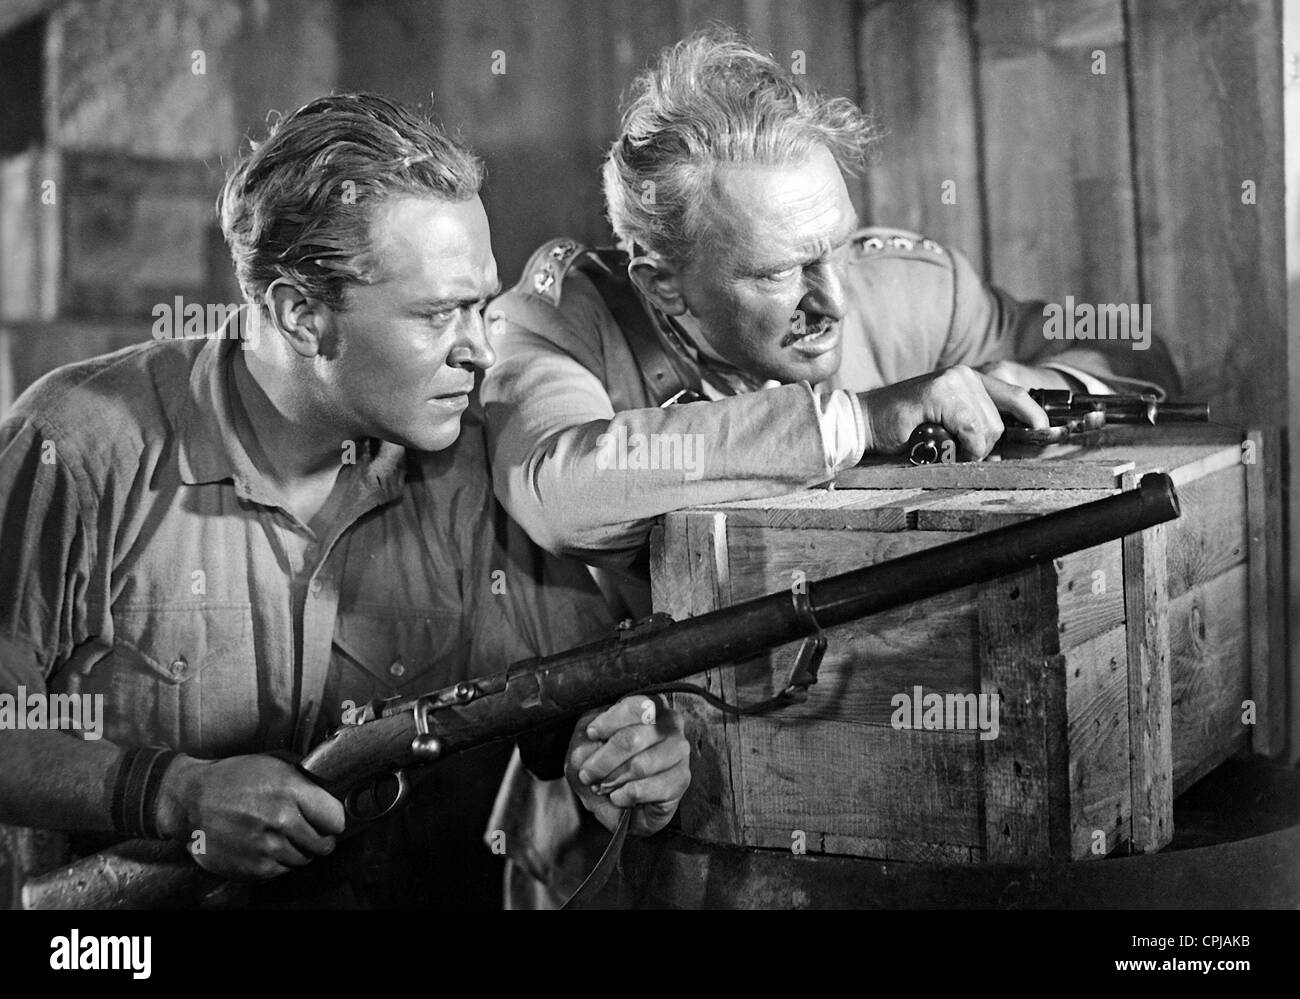 Gustav Froehlich and Peter Voss in 'Alarm in Peking', 1937 Stock Photo